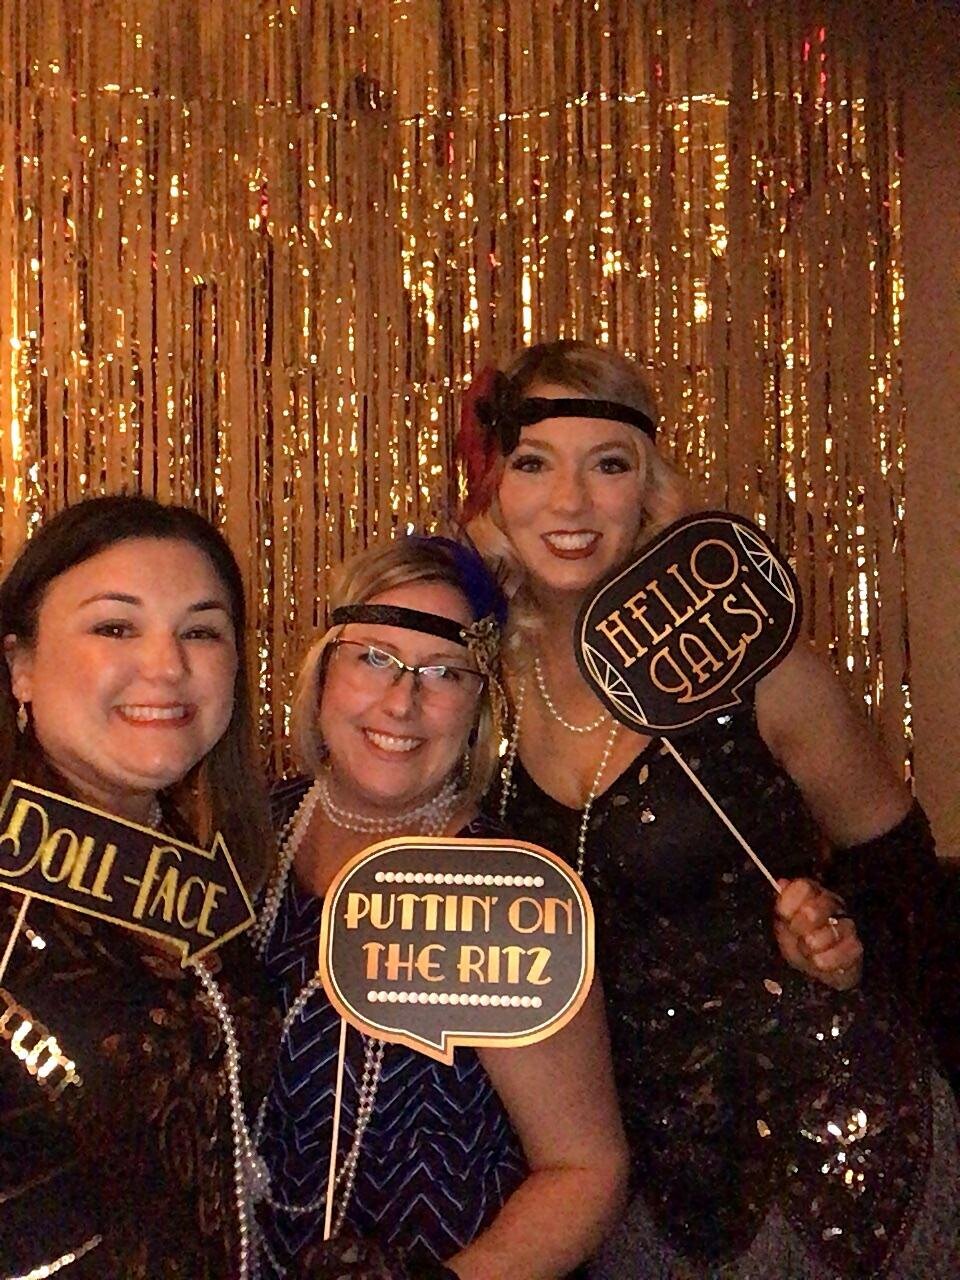 Roaring 20's themed party with guests in flapper dresses posing in photobooth